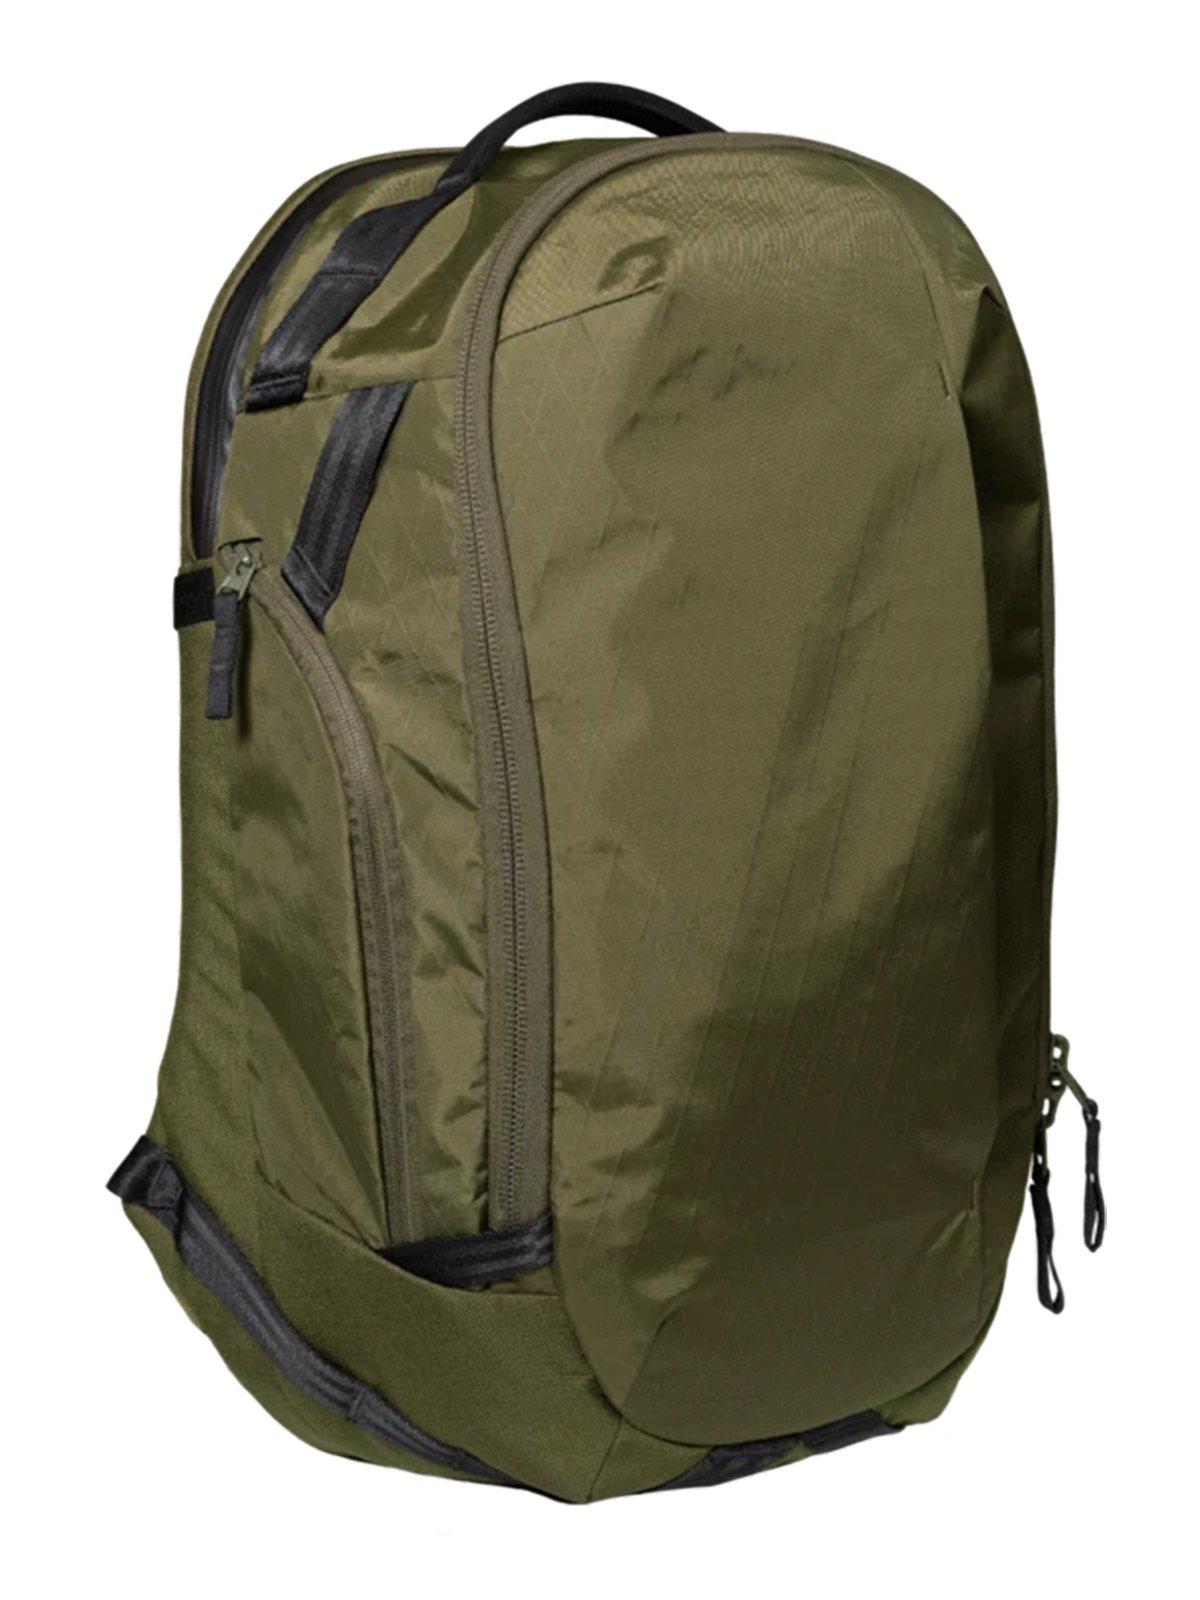 Able Carry Max Backpack Earth Green